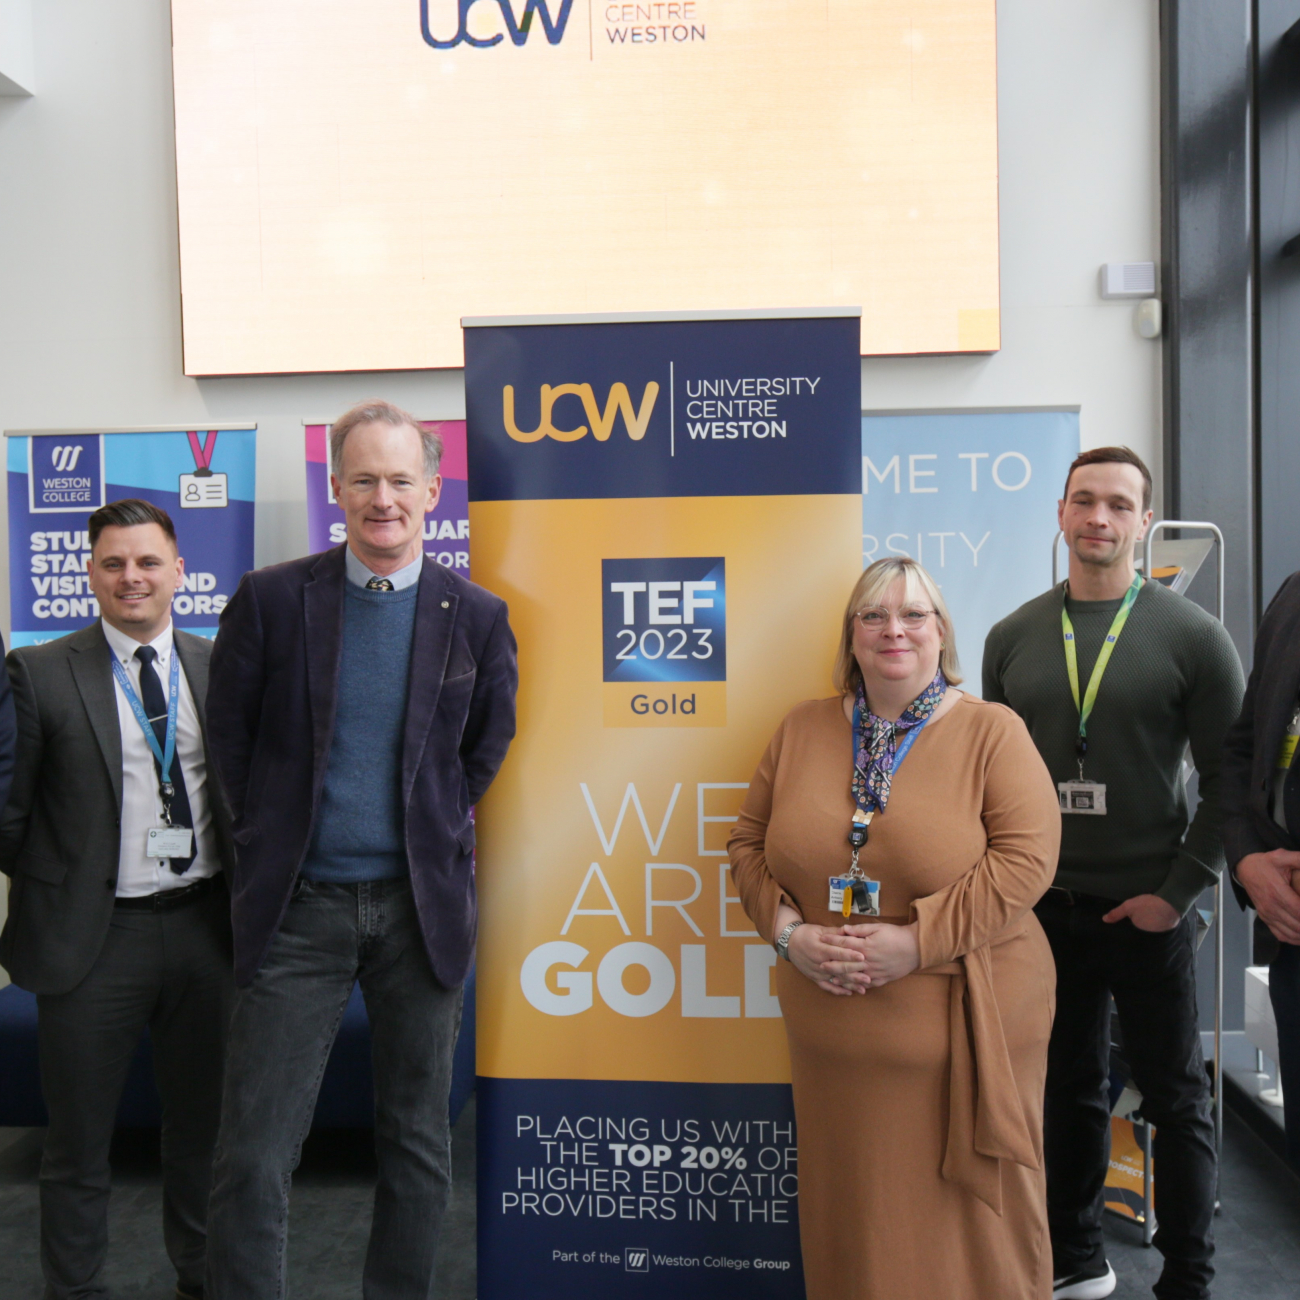 John Penrose, Andrew Leighton-Price and others stand by a sign saying UCW 'TEF Gold'